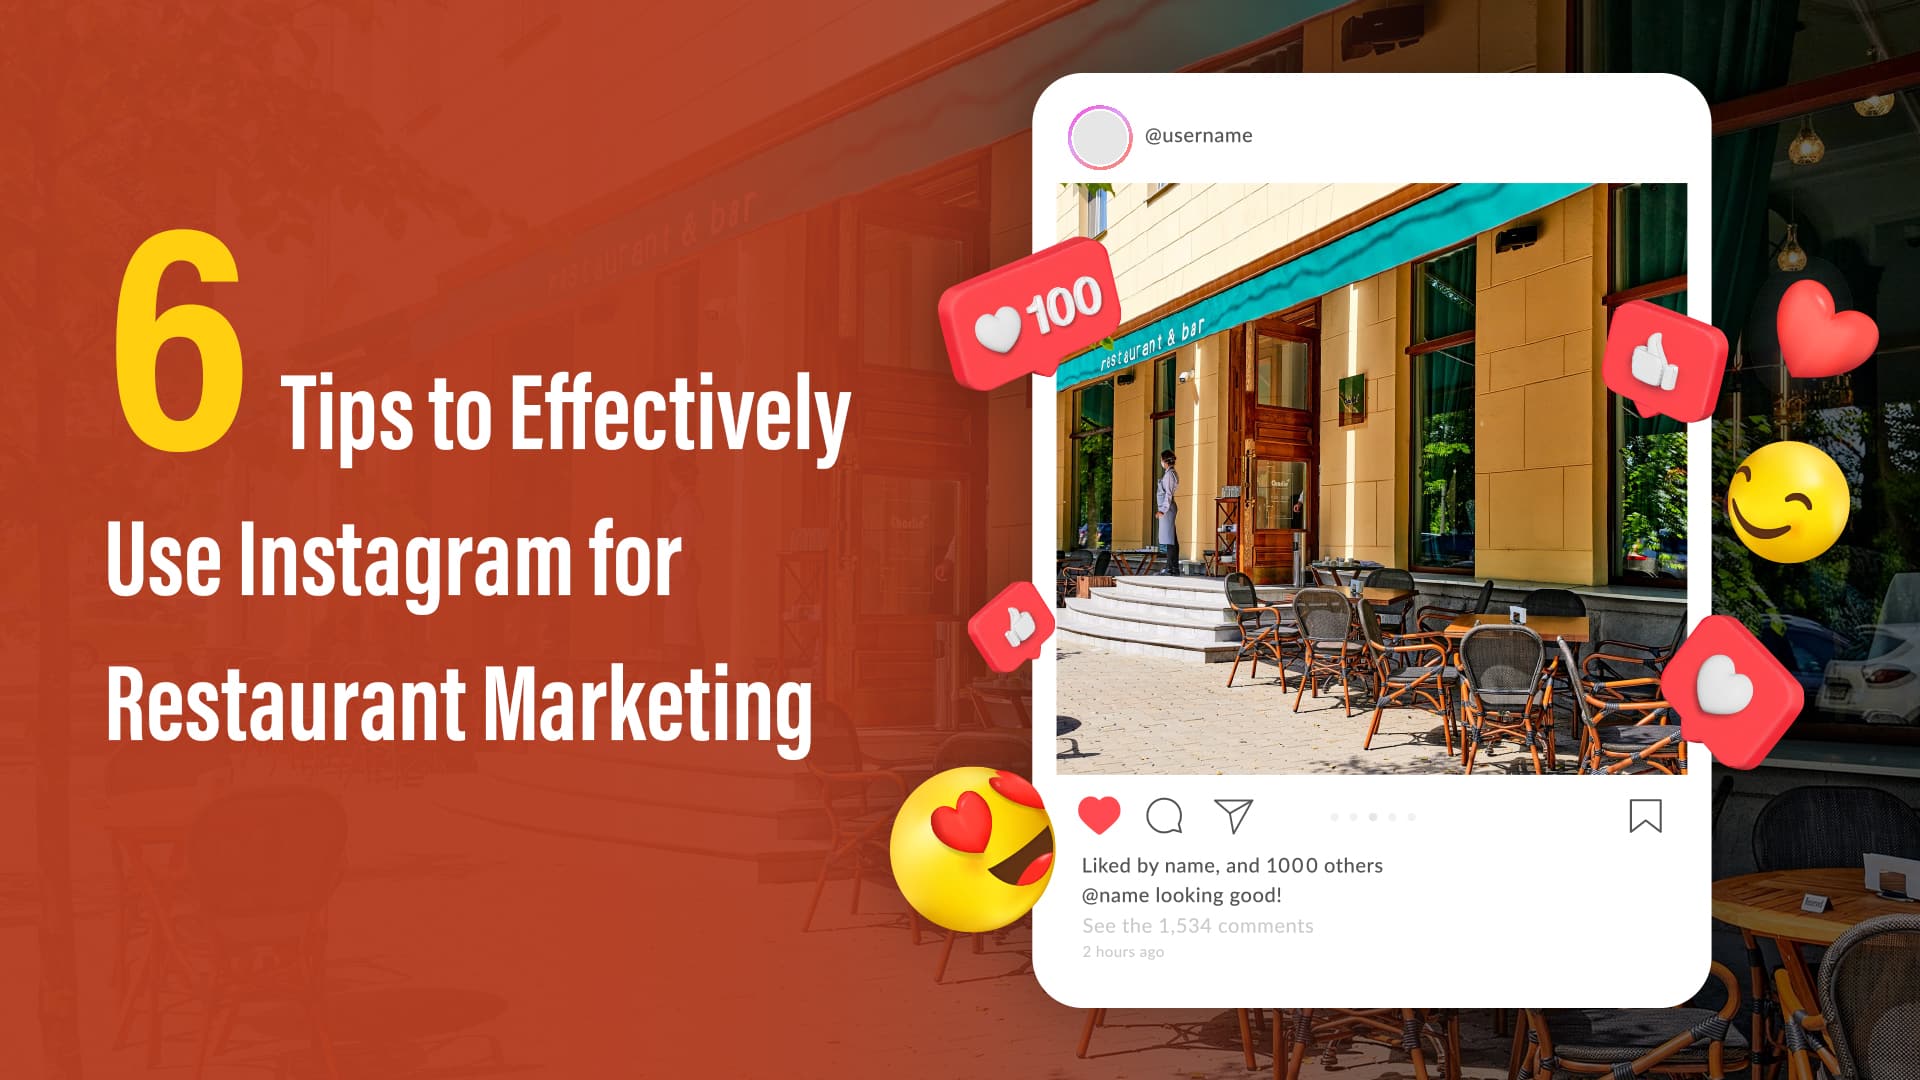 6 Tips to Effectively Use Instagram for Restaurant Marketing